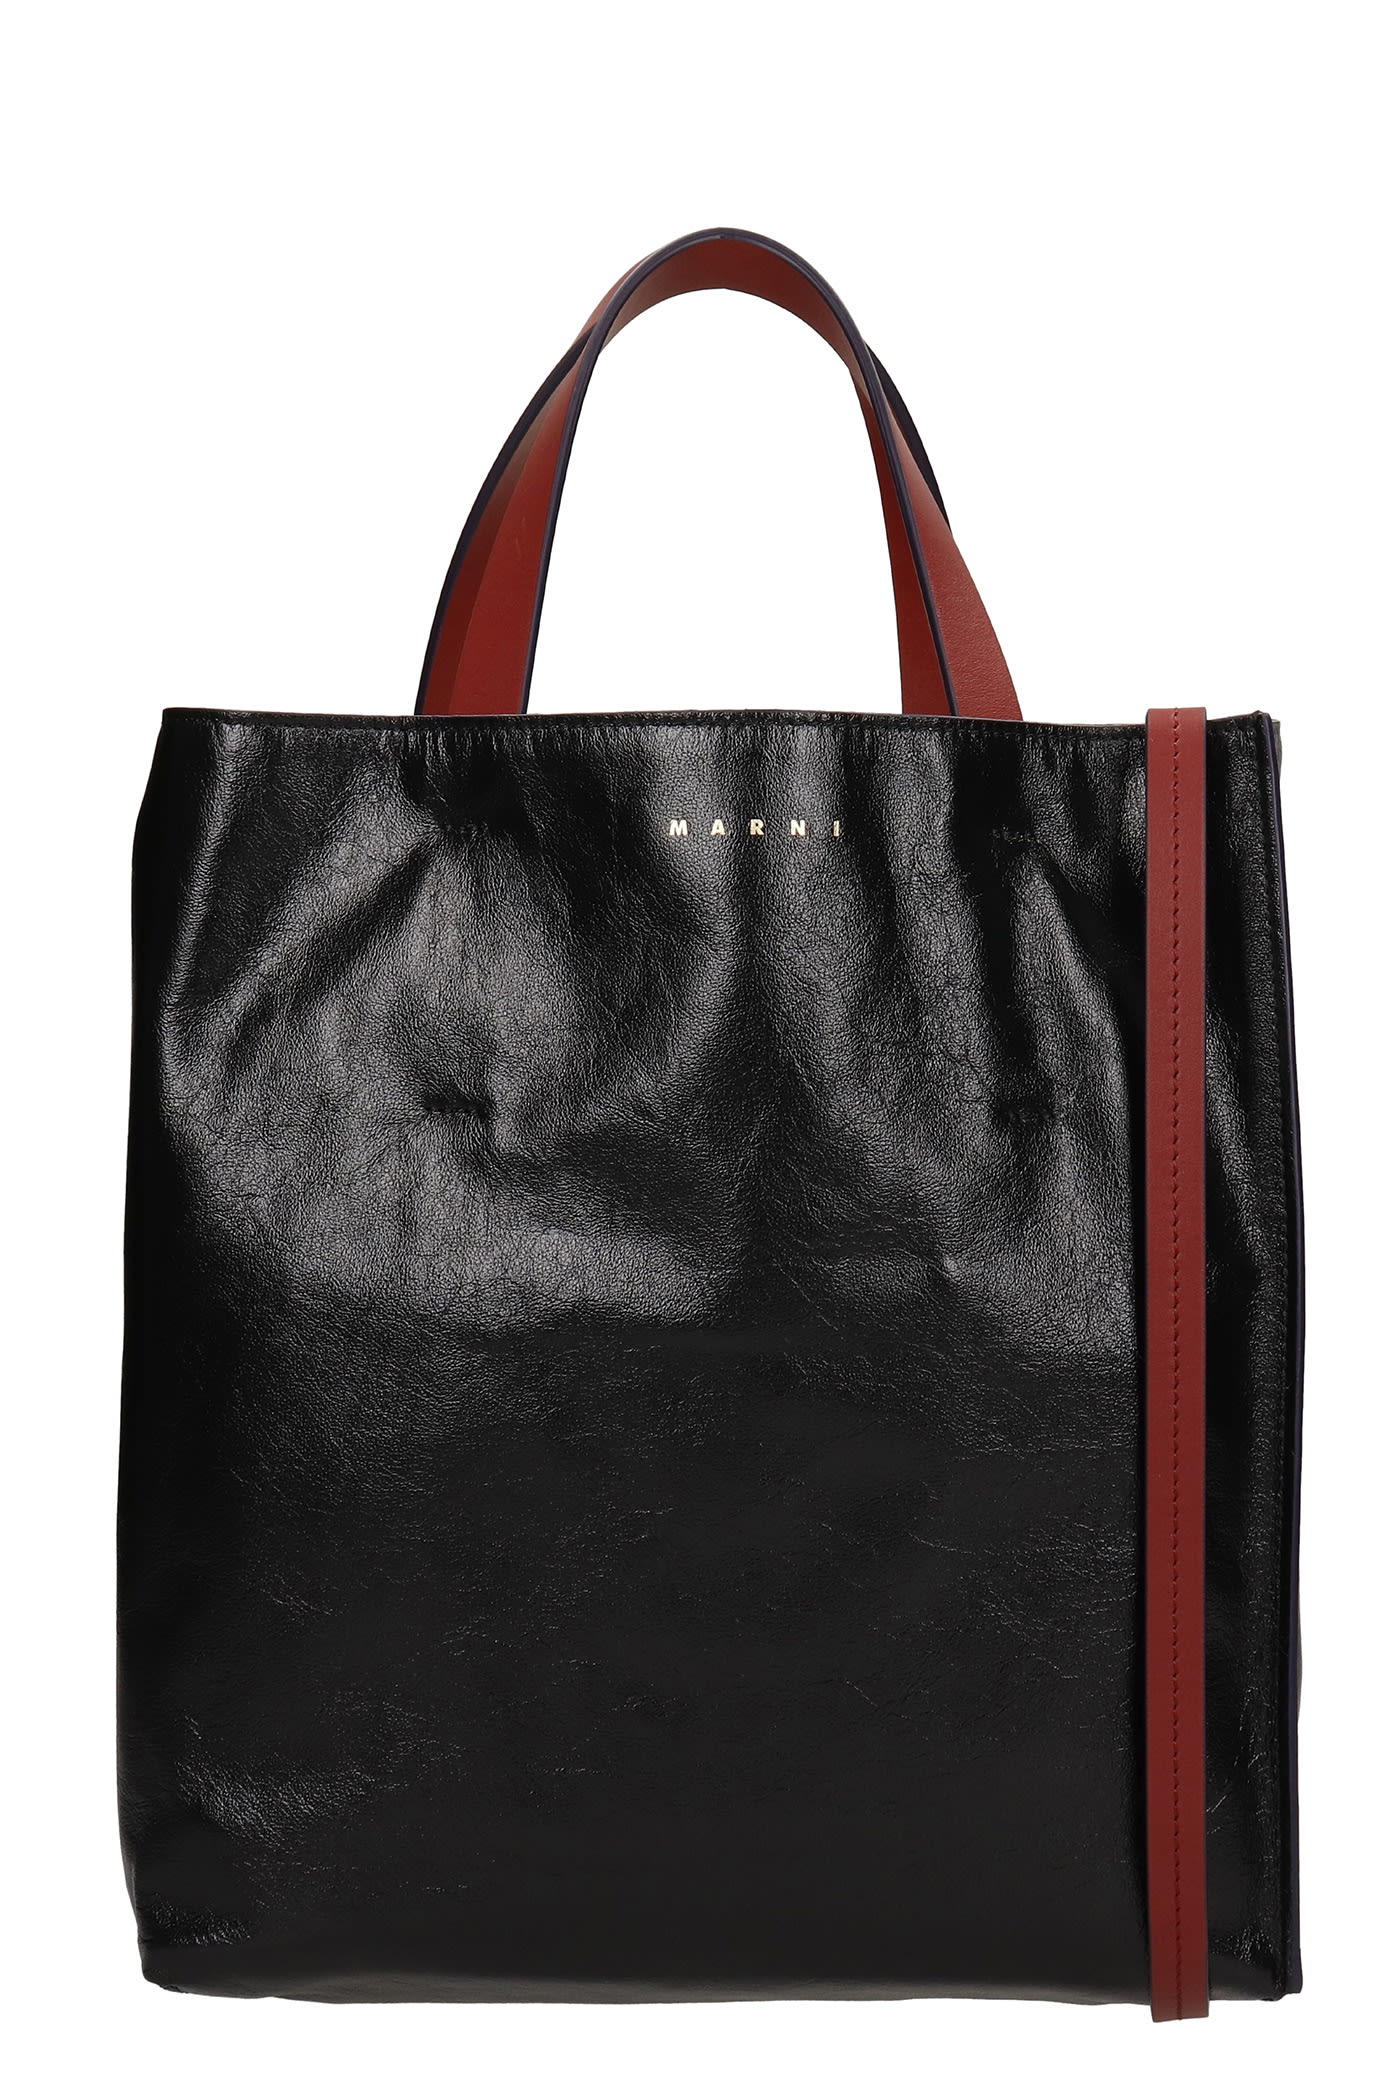 Marni Museo Soft Tote In Black Leather